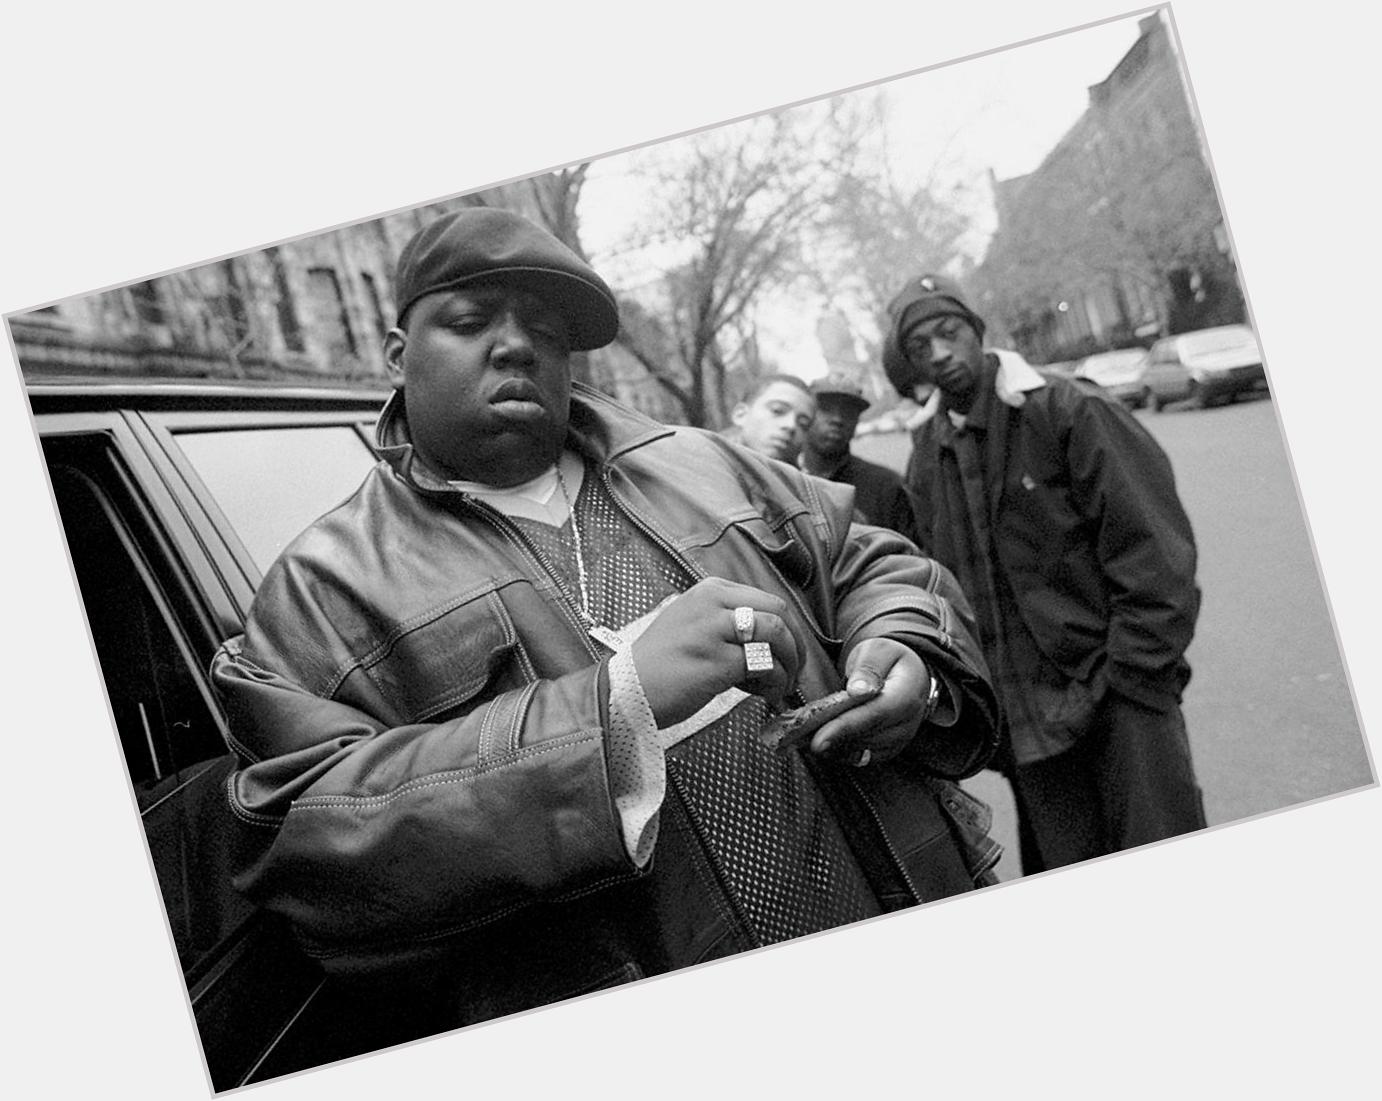   ThatsHistory: Happy Birthday to Notorious B.I.G., who would have been 43 years old today. 